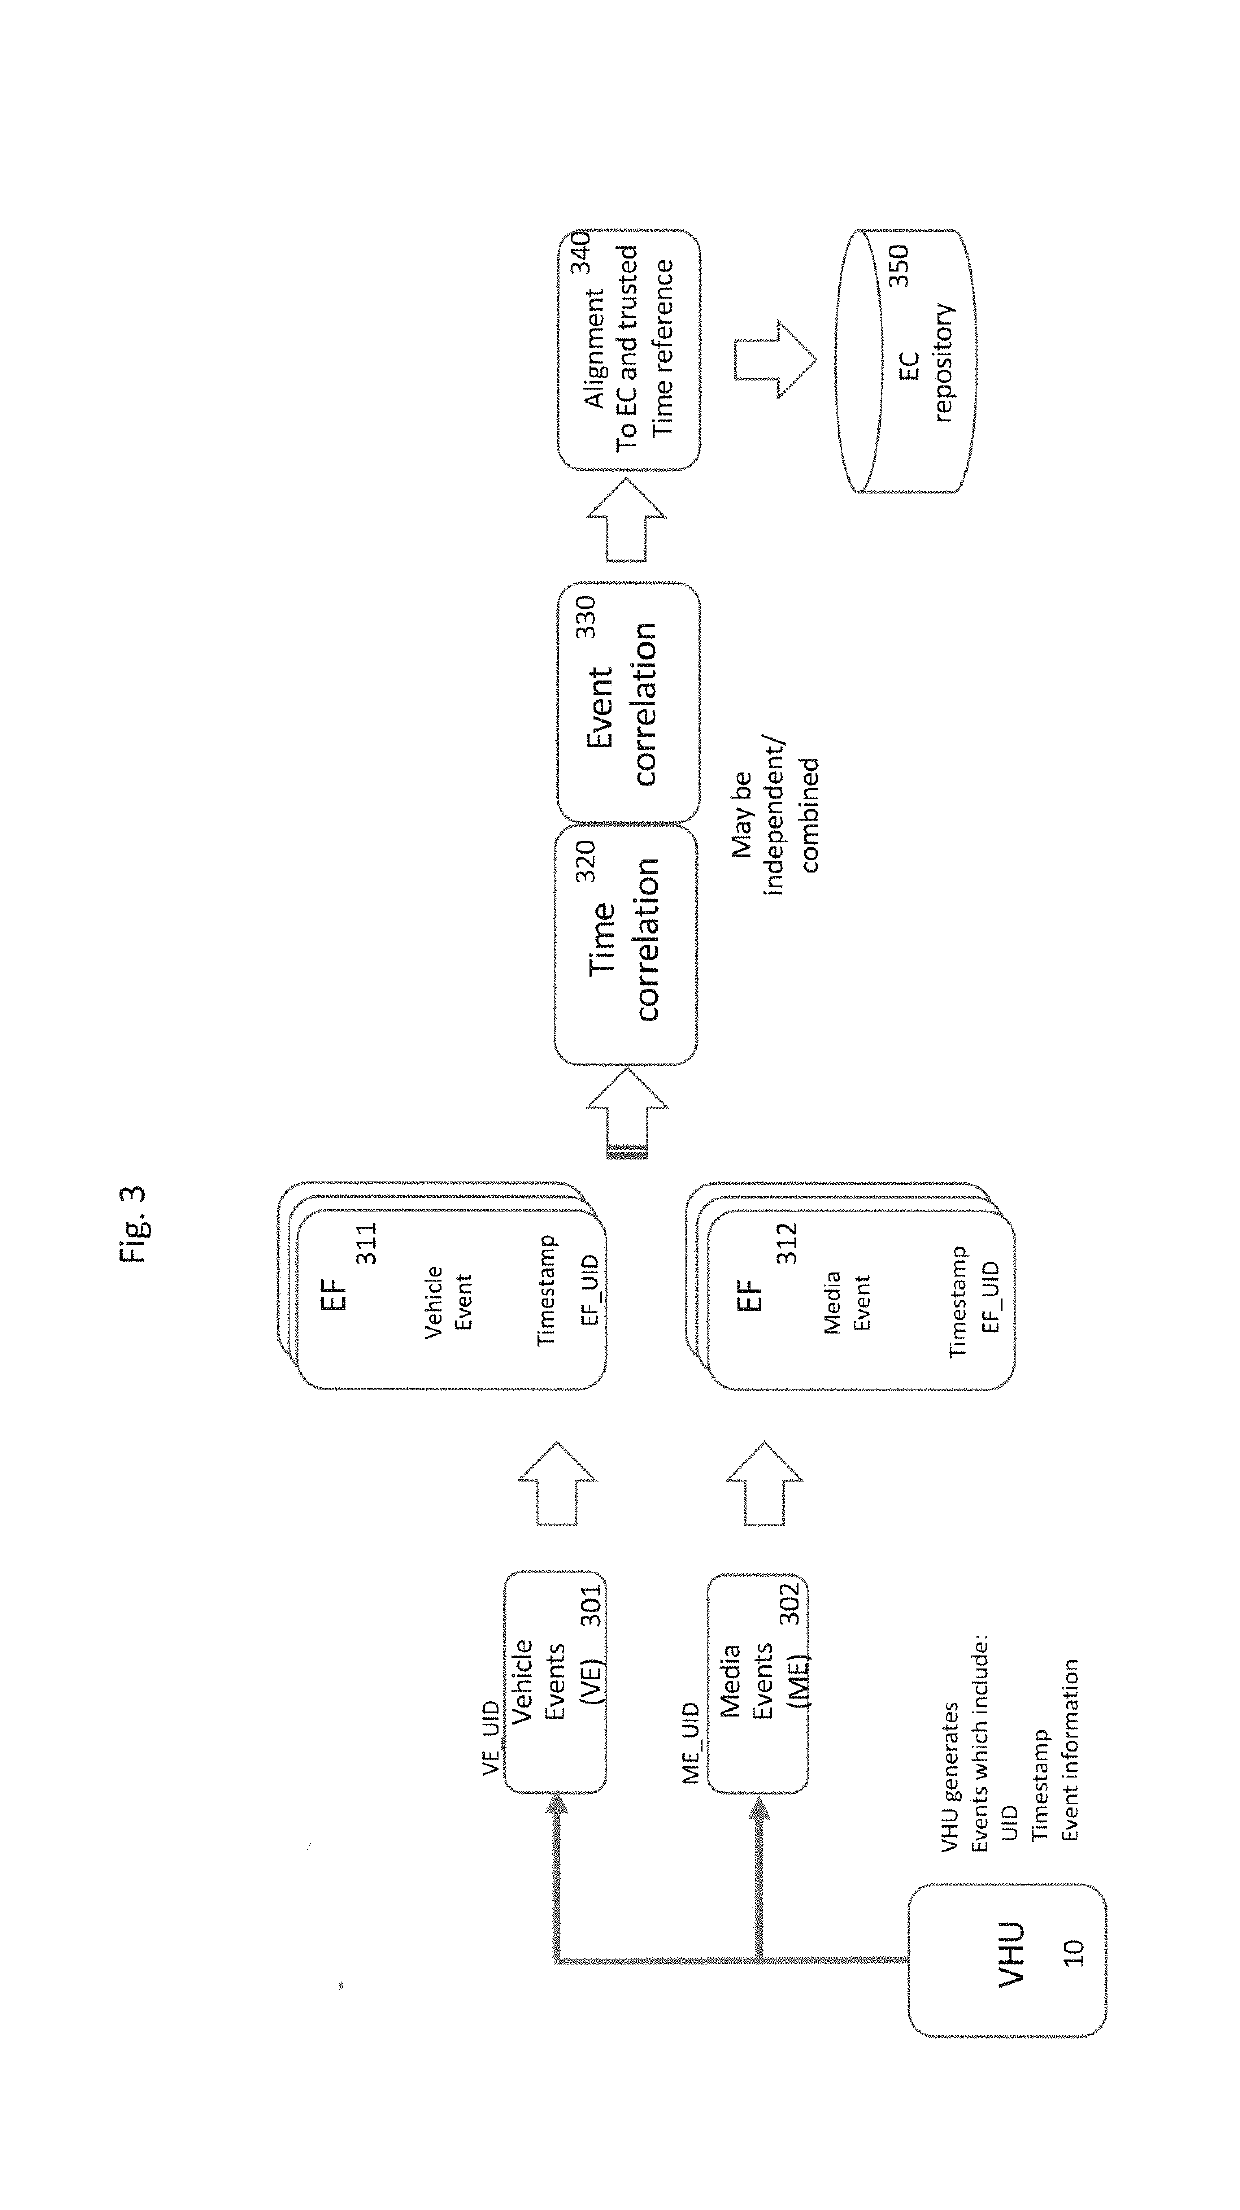 Method and system for cross channel in-car media consumption measurement and analysis using blockchain